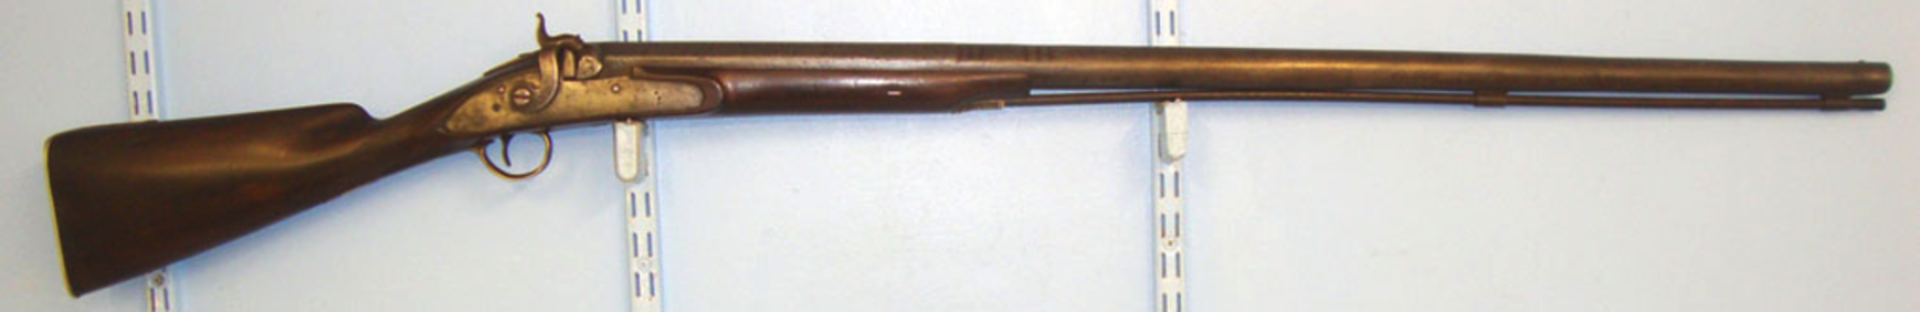 Large, C1850 6 Bore Percussion Wild Fowling Piece / Punt Gun. - Image 2 of 3